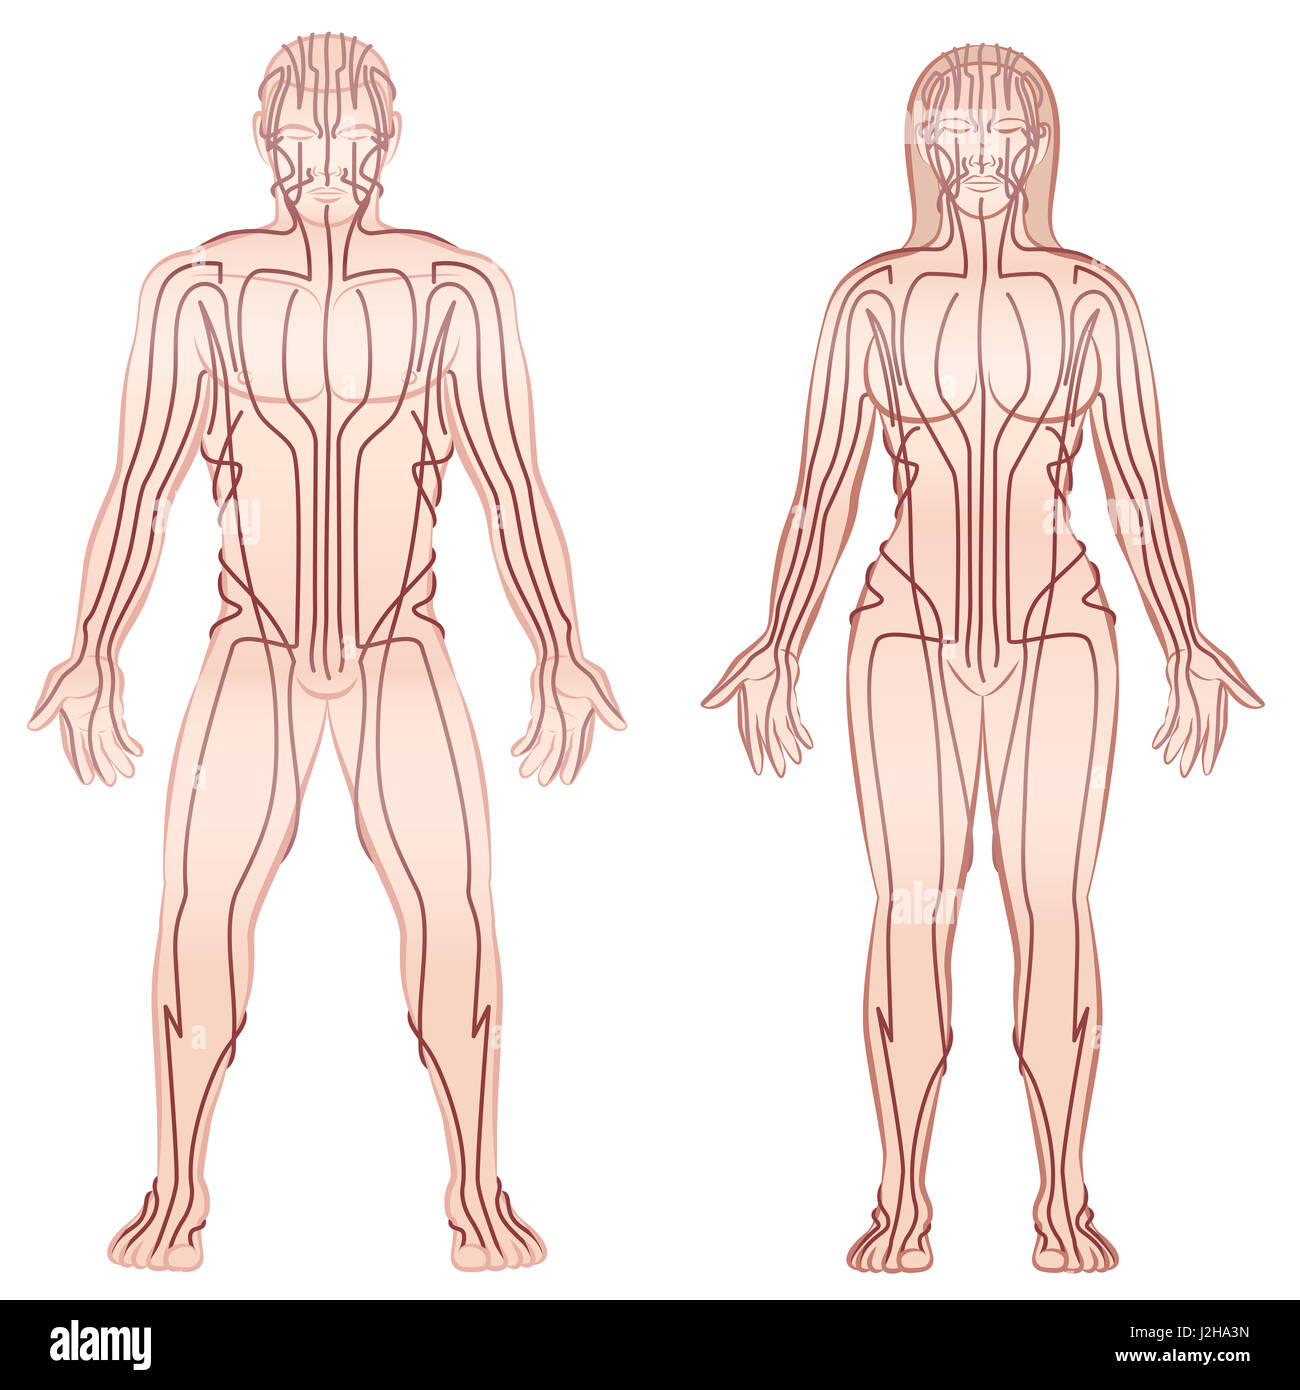 Body acupuncture meridians of man and woman - alternative therapy tcm treatment infographic - isolated illustration on white background. Stock Photo